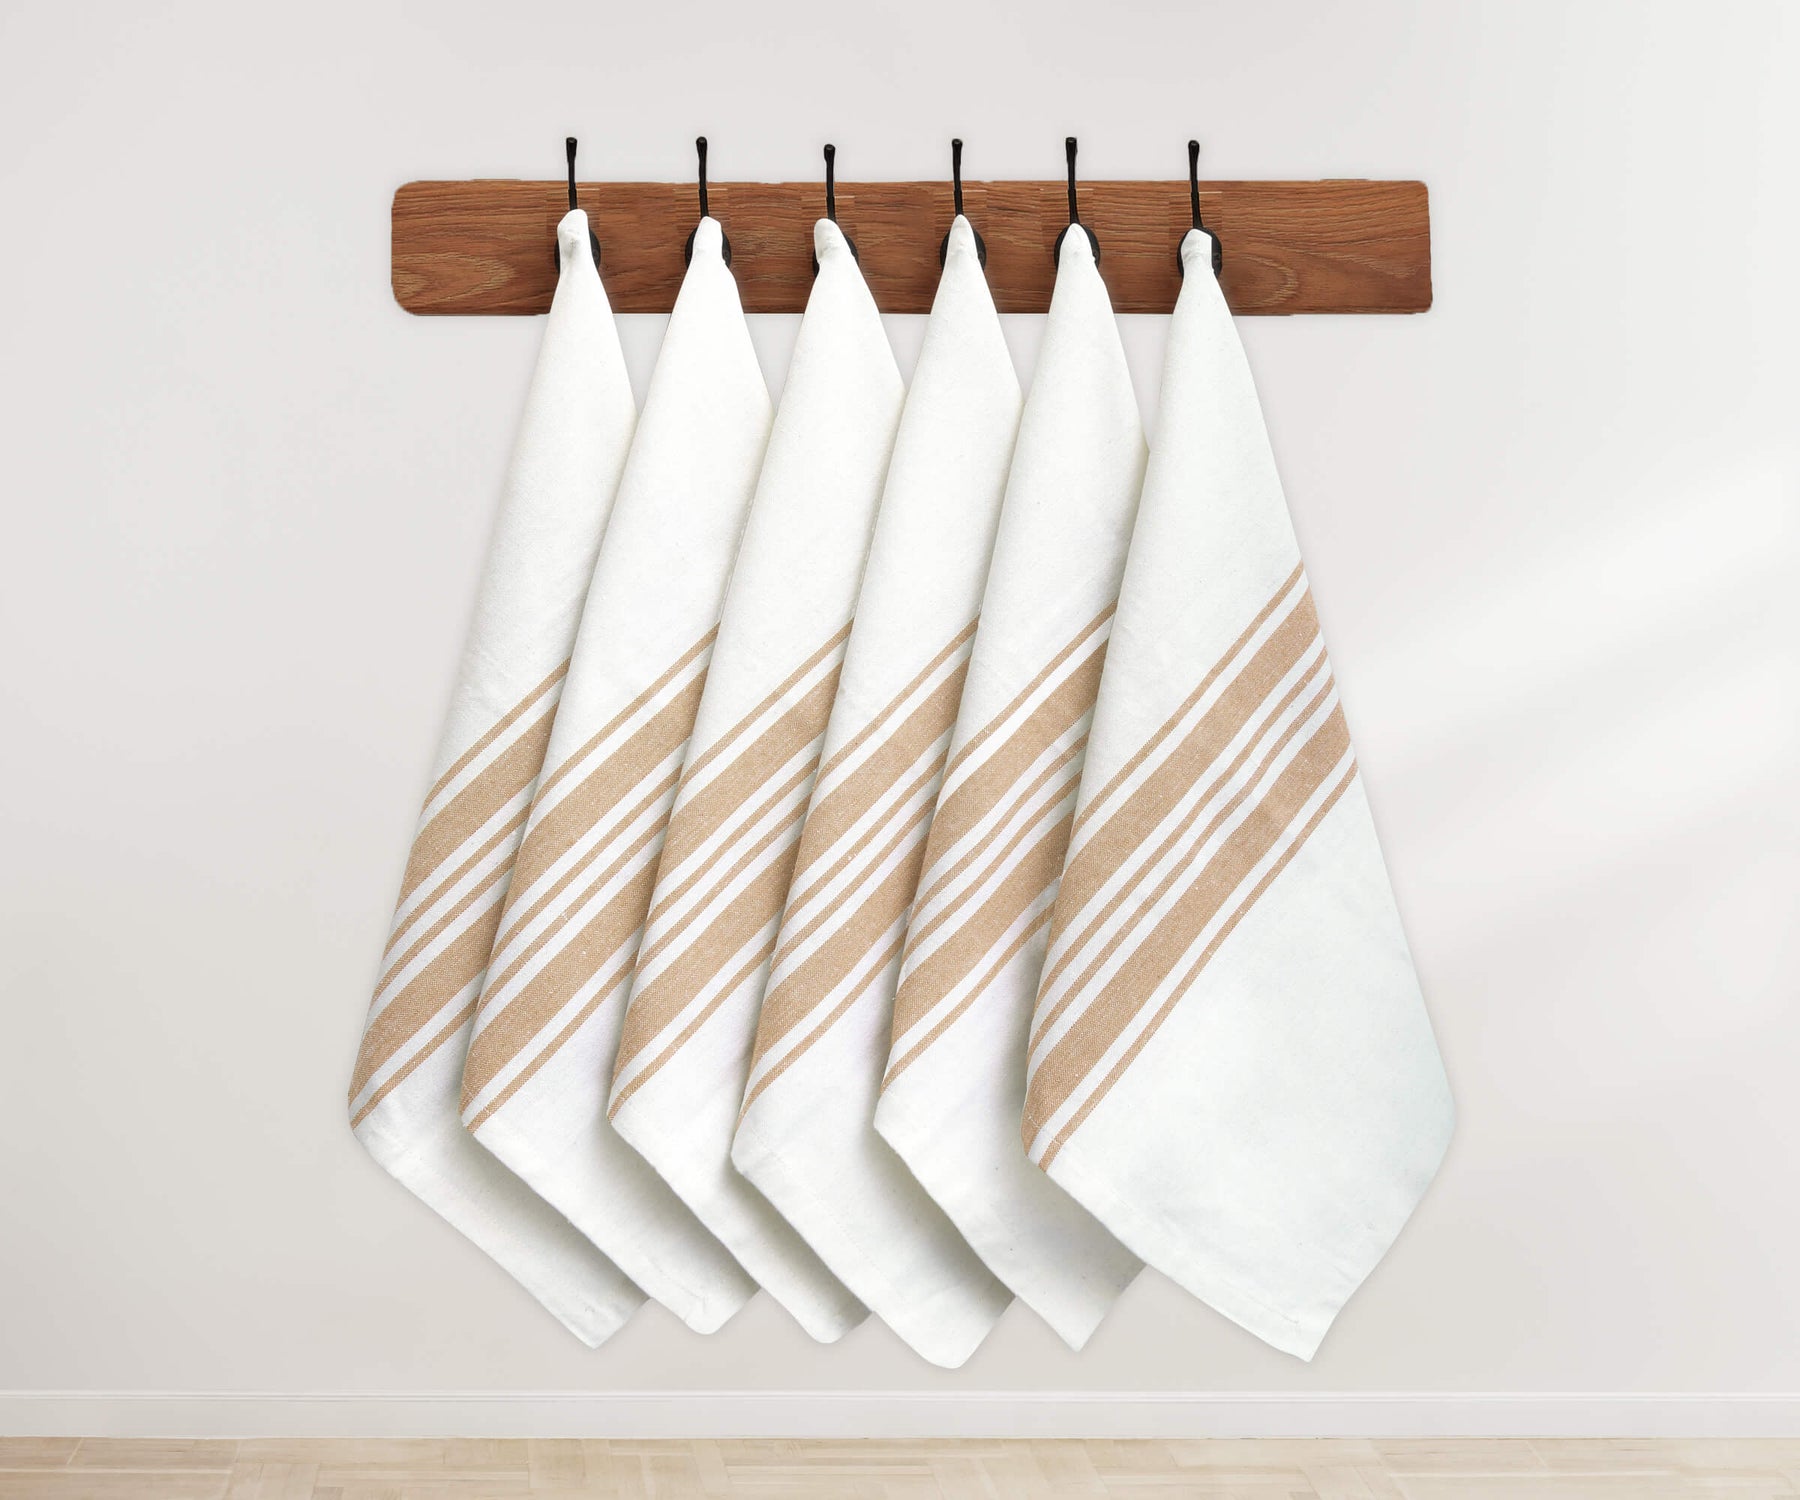 Farmhouse napkins -white cloth napkins & striped napkins/bistro napkins set of 6 with the long stripes of beige and cream are hung on the hanger.